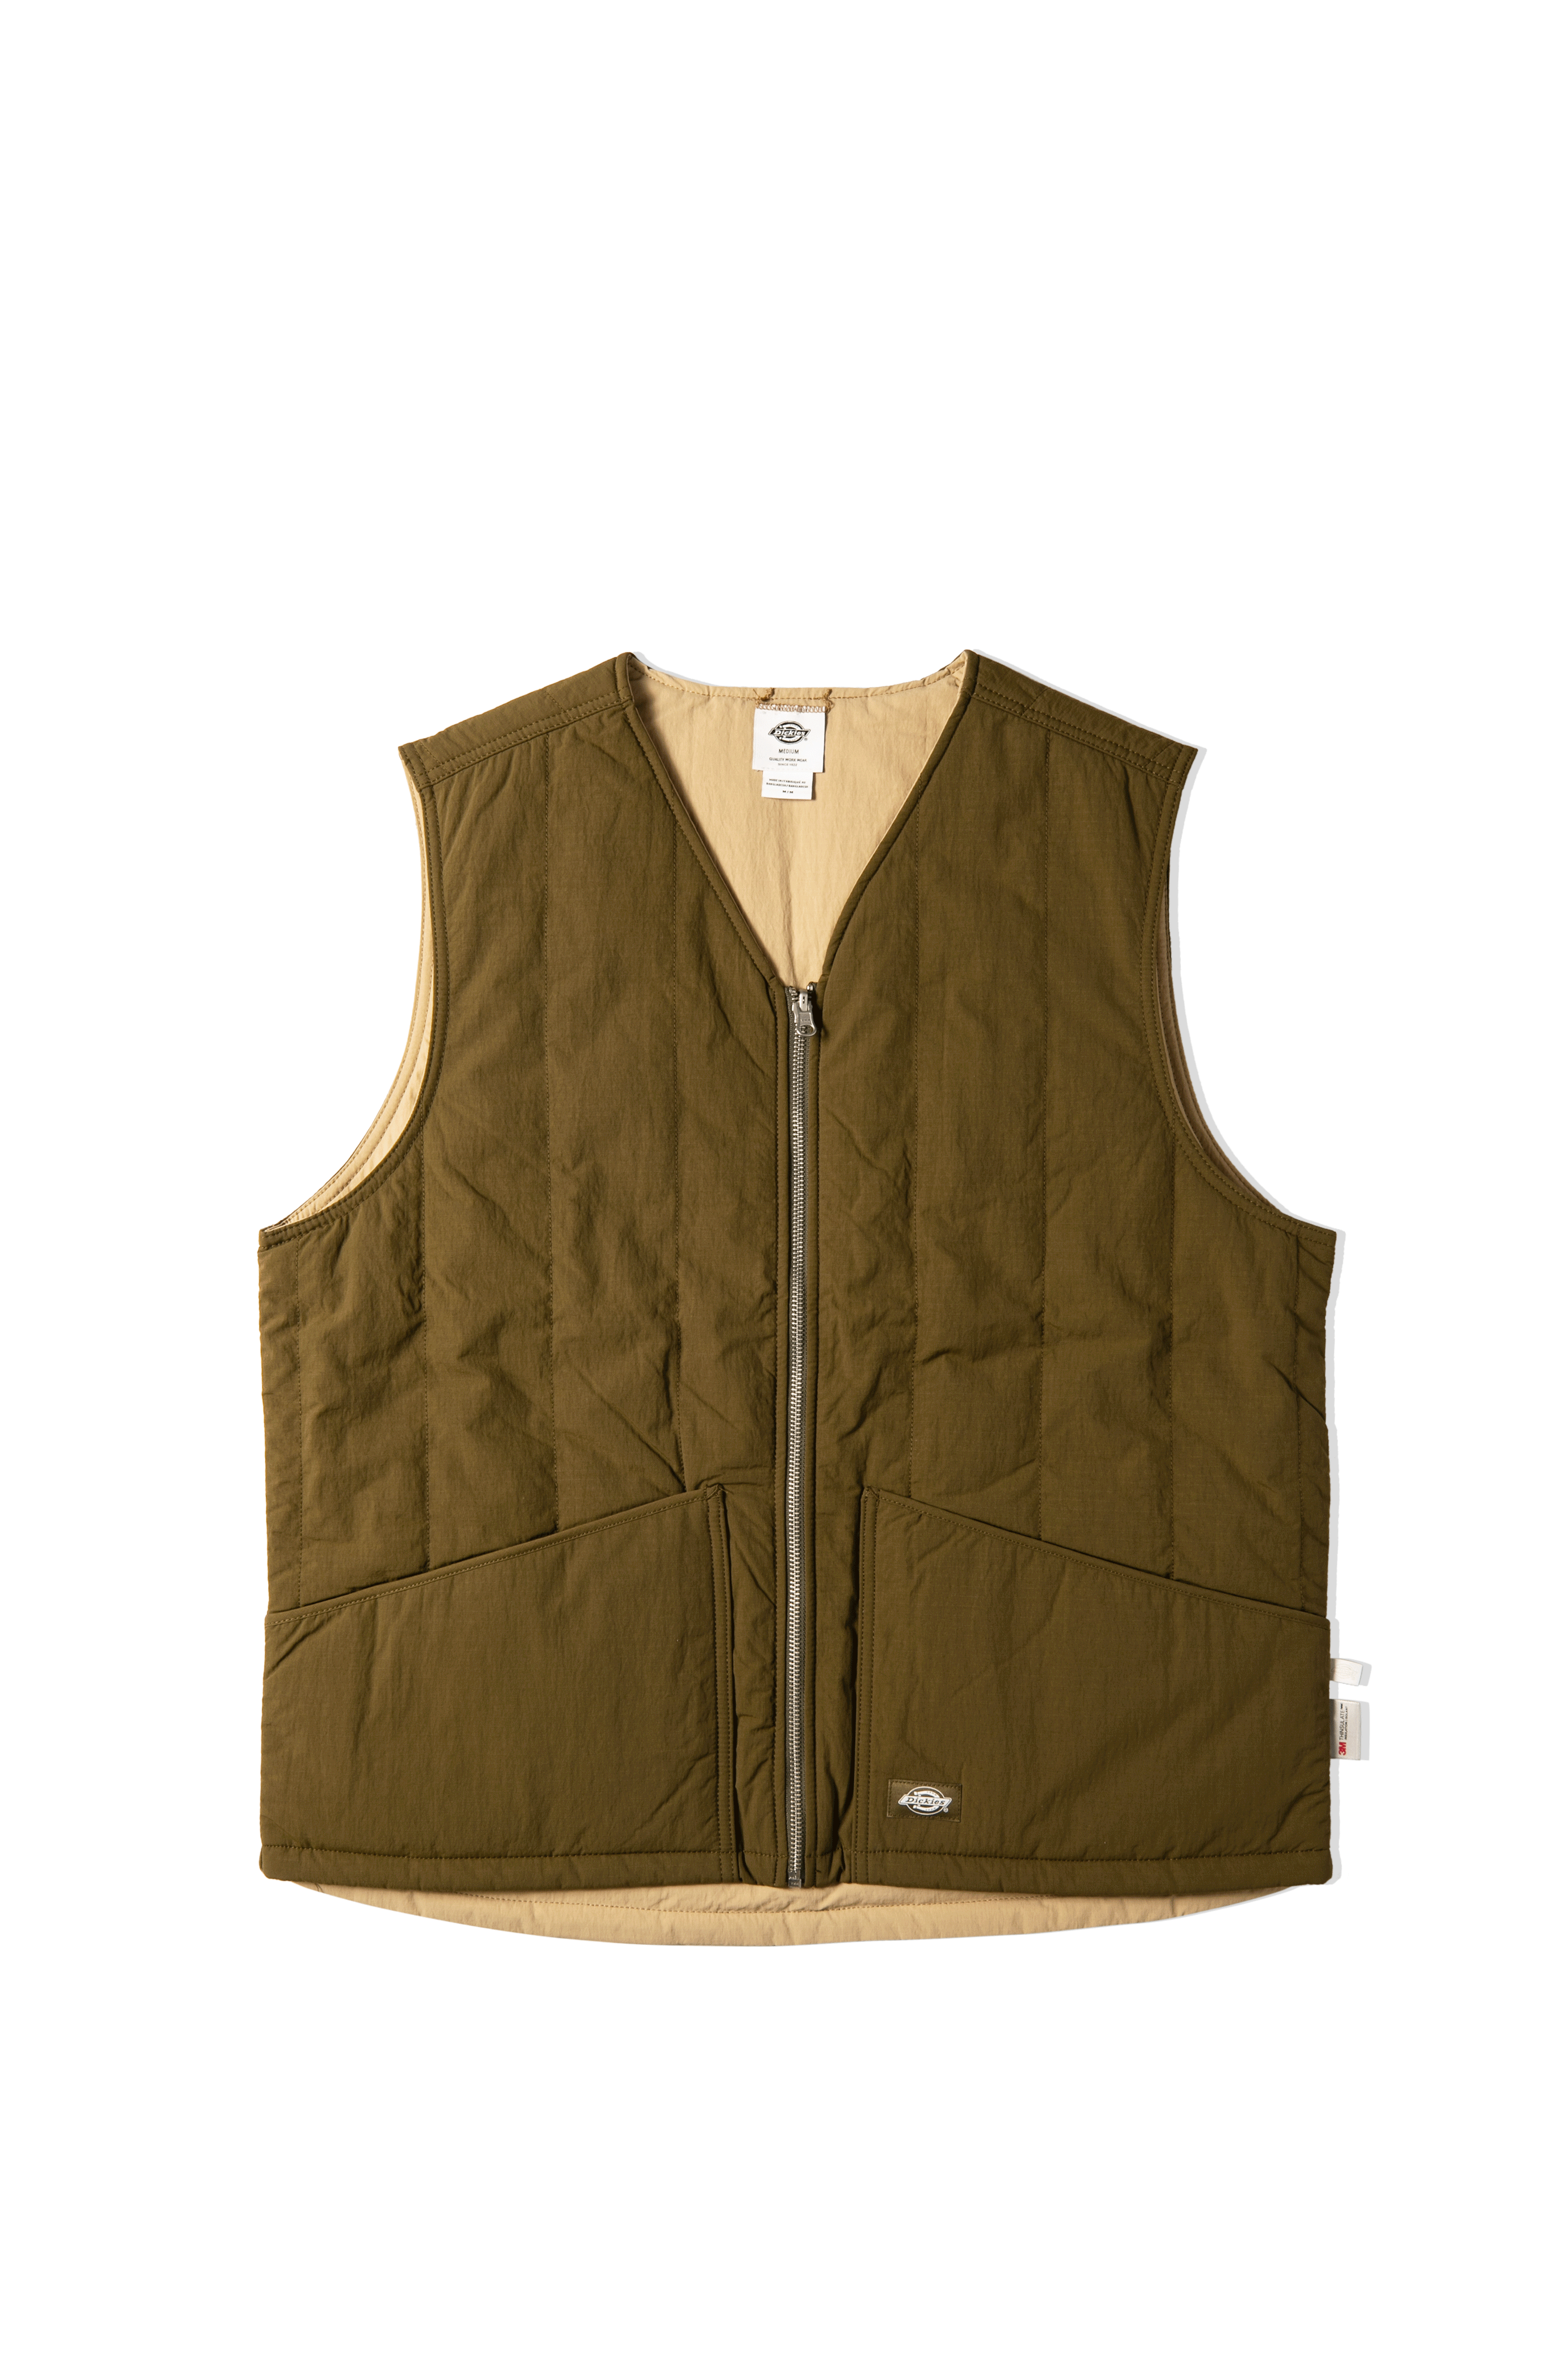 Delivery Vest